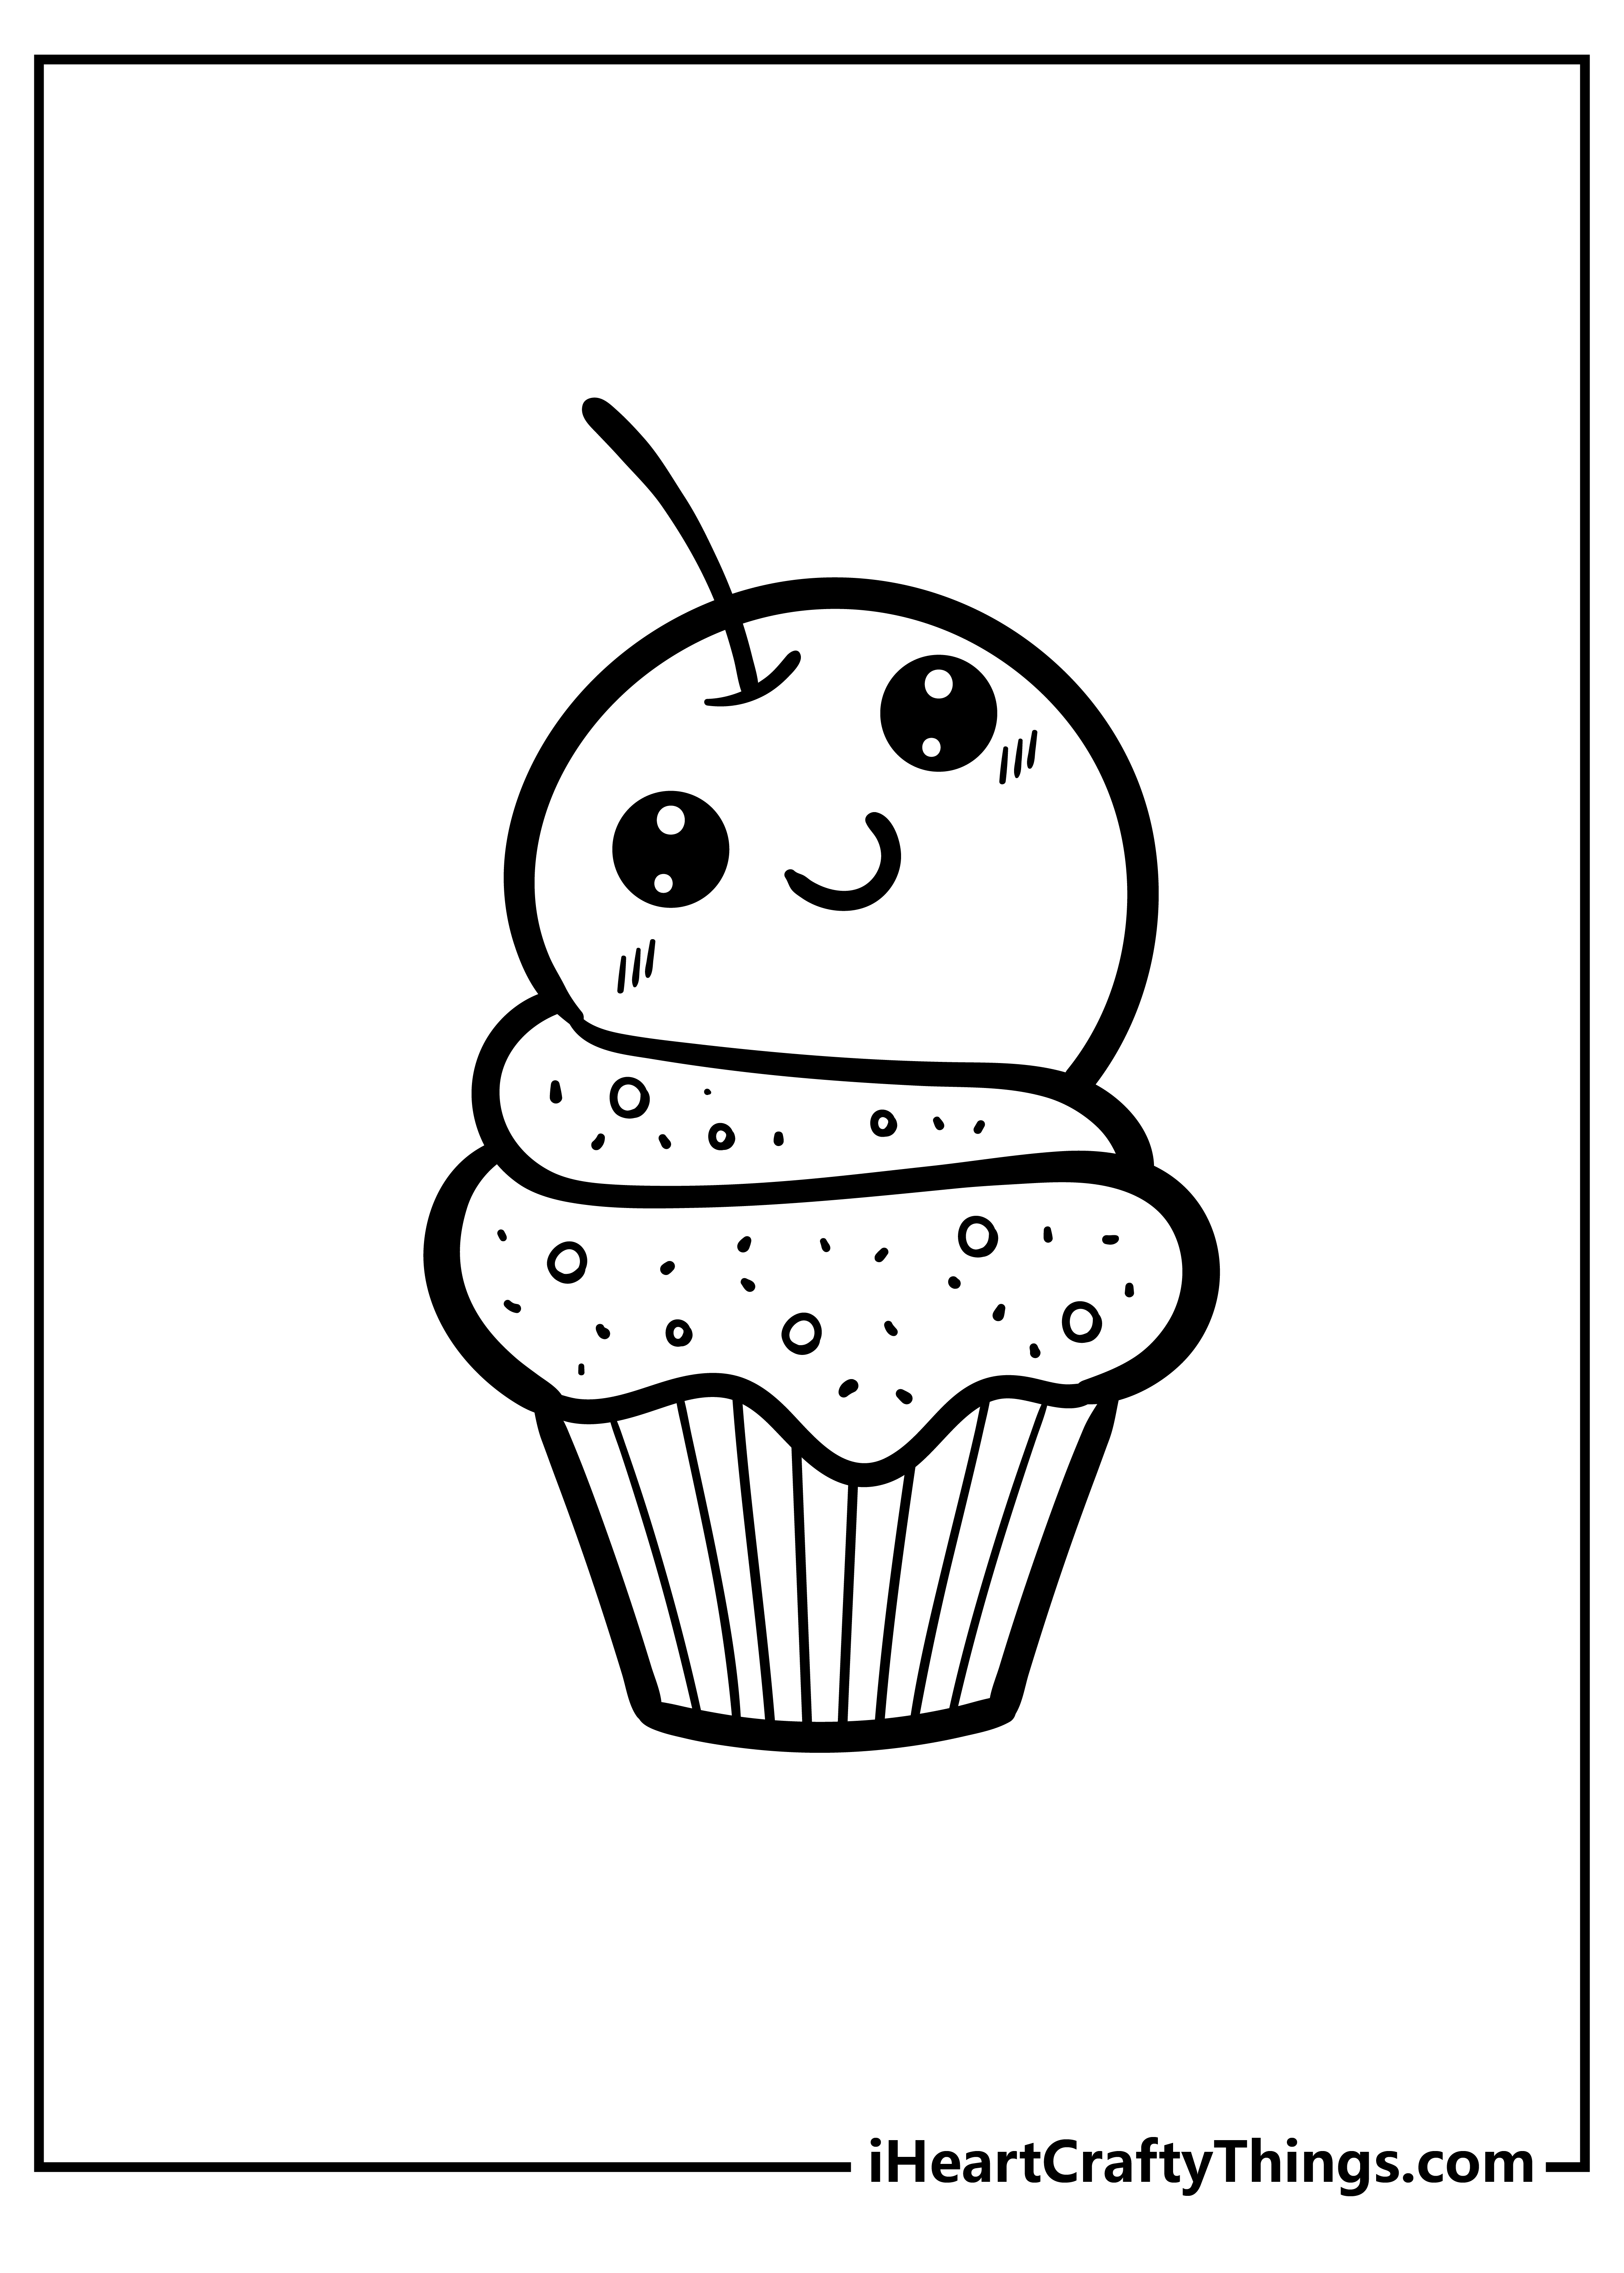 Cute Food Coloring Pages free pdf download